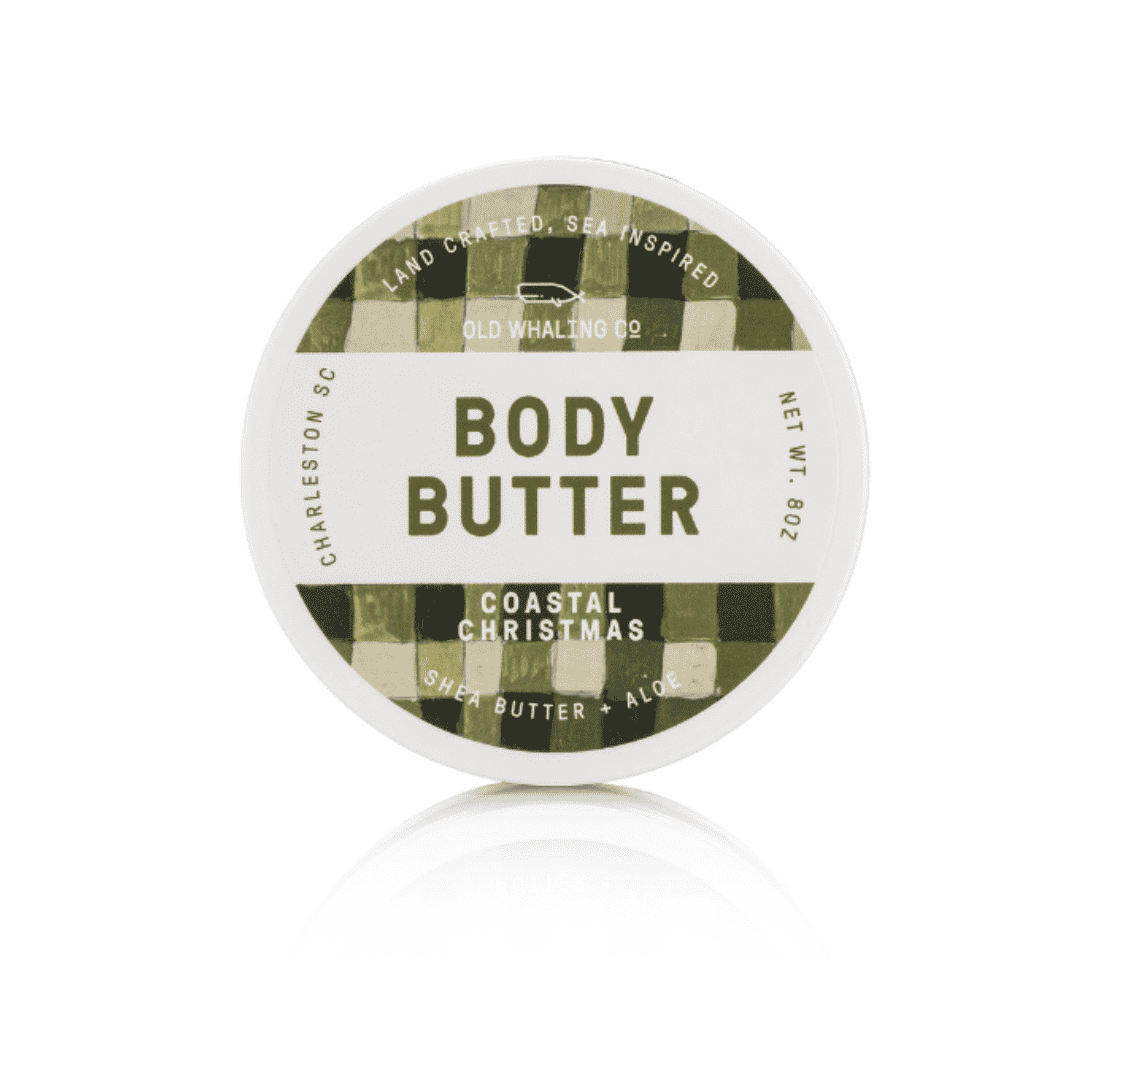 The top of a container of body butter from The Old Whaling Company.